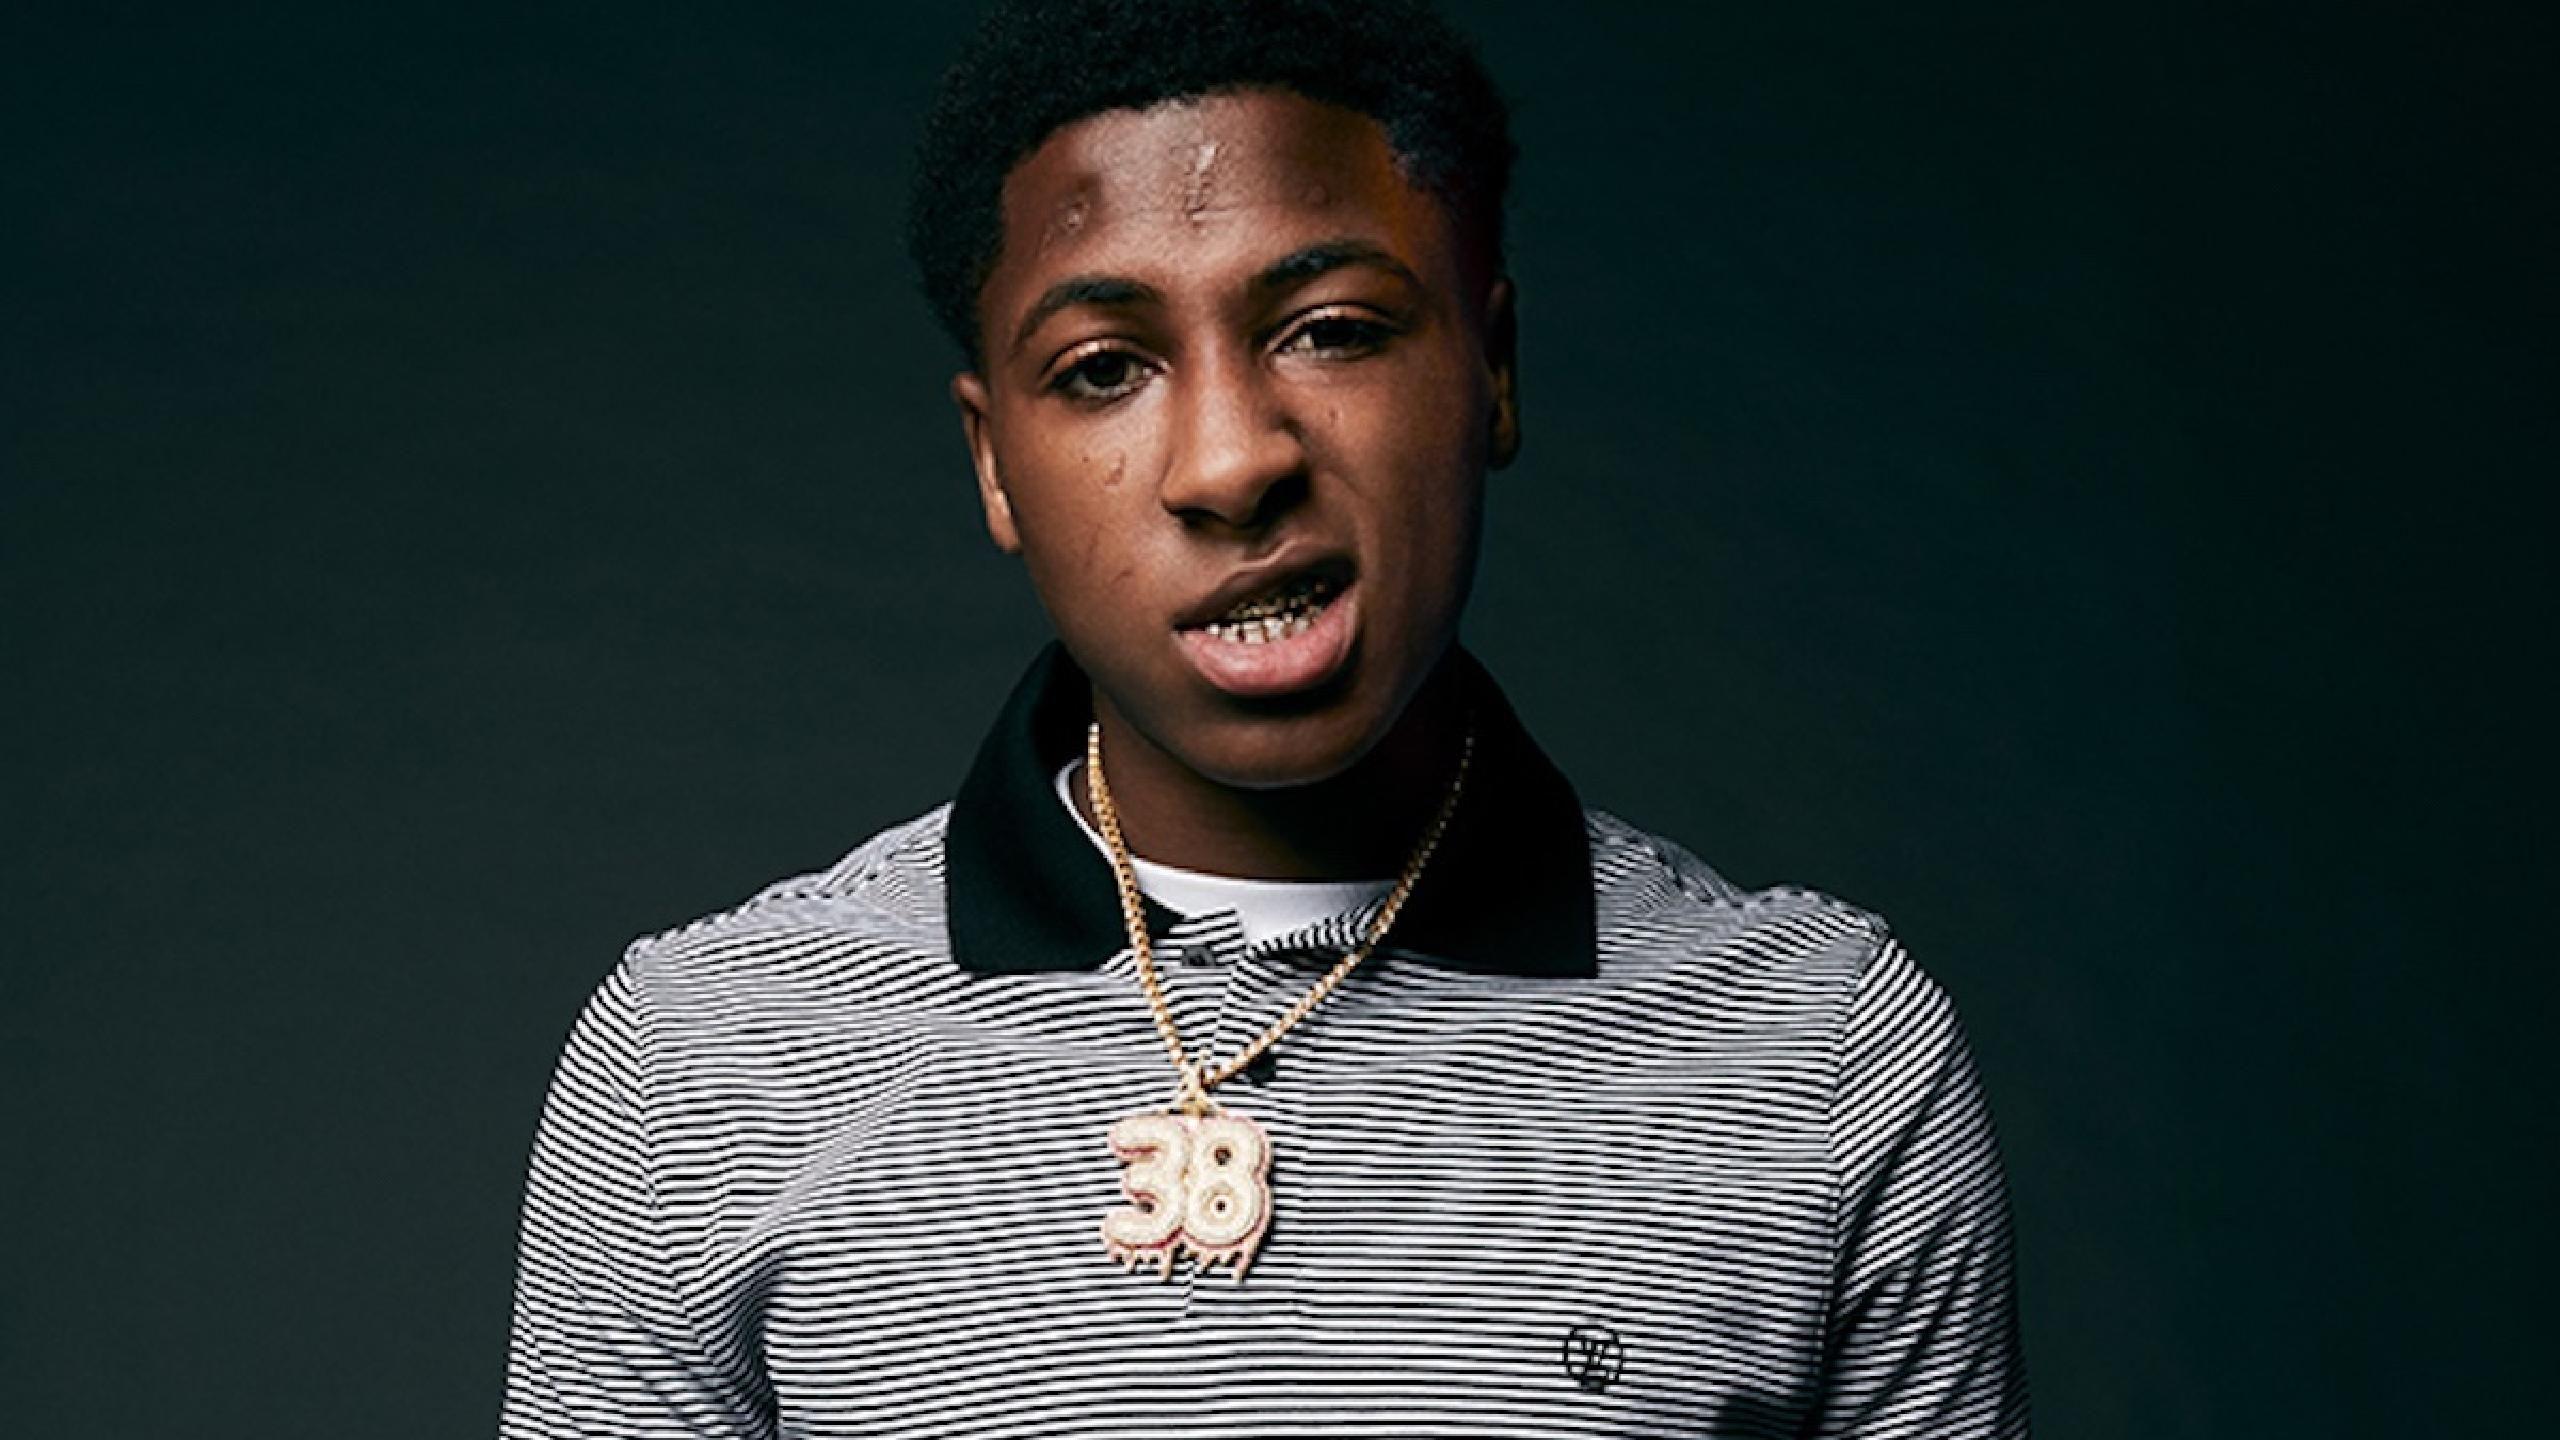 Youngboy Never Broke Again tour dates 2017 2018. Youngboy Never